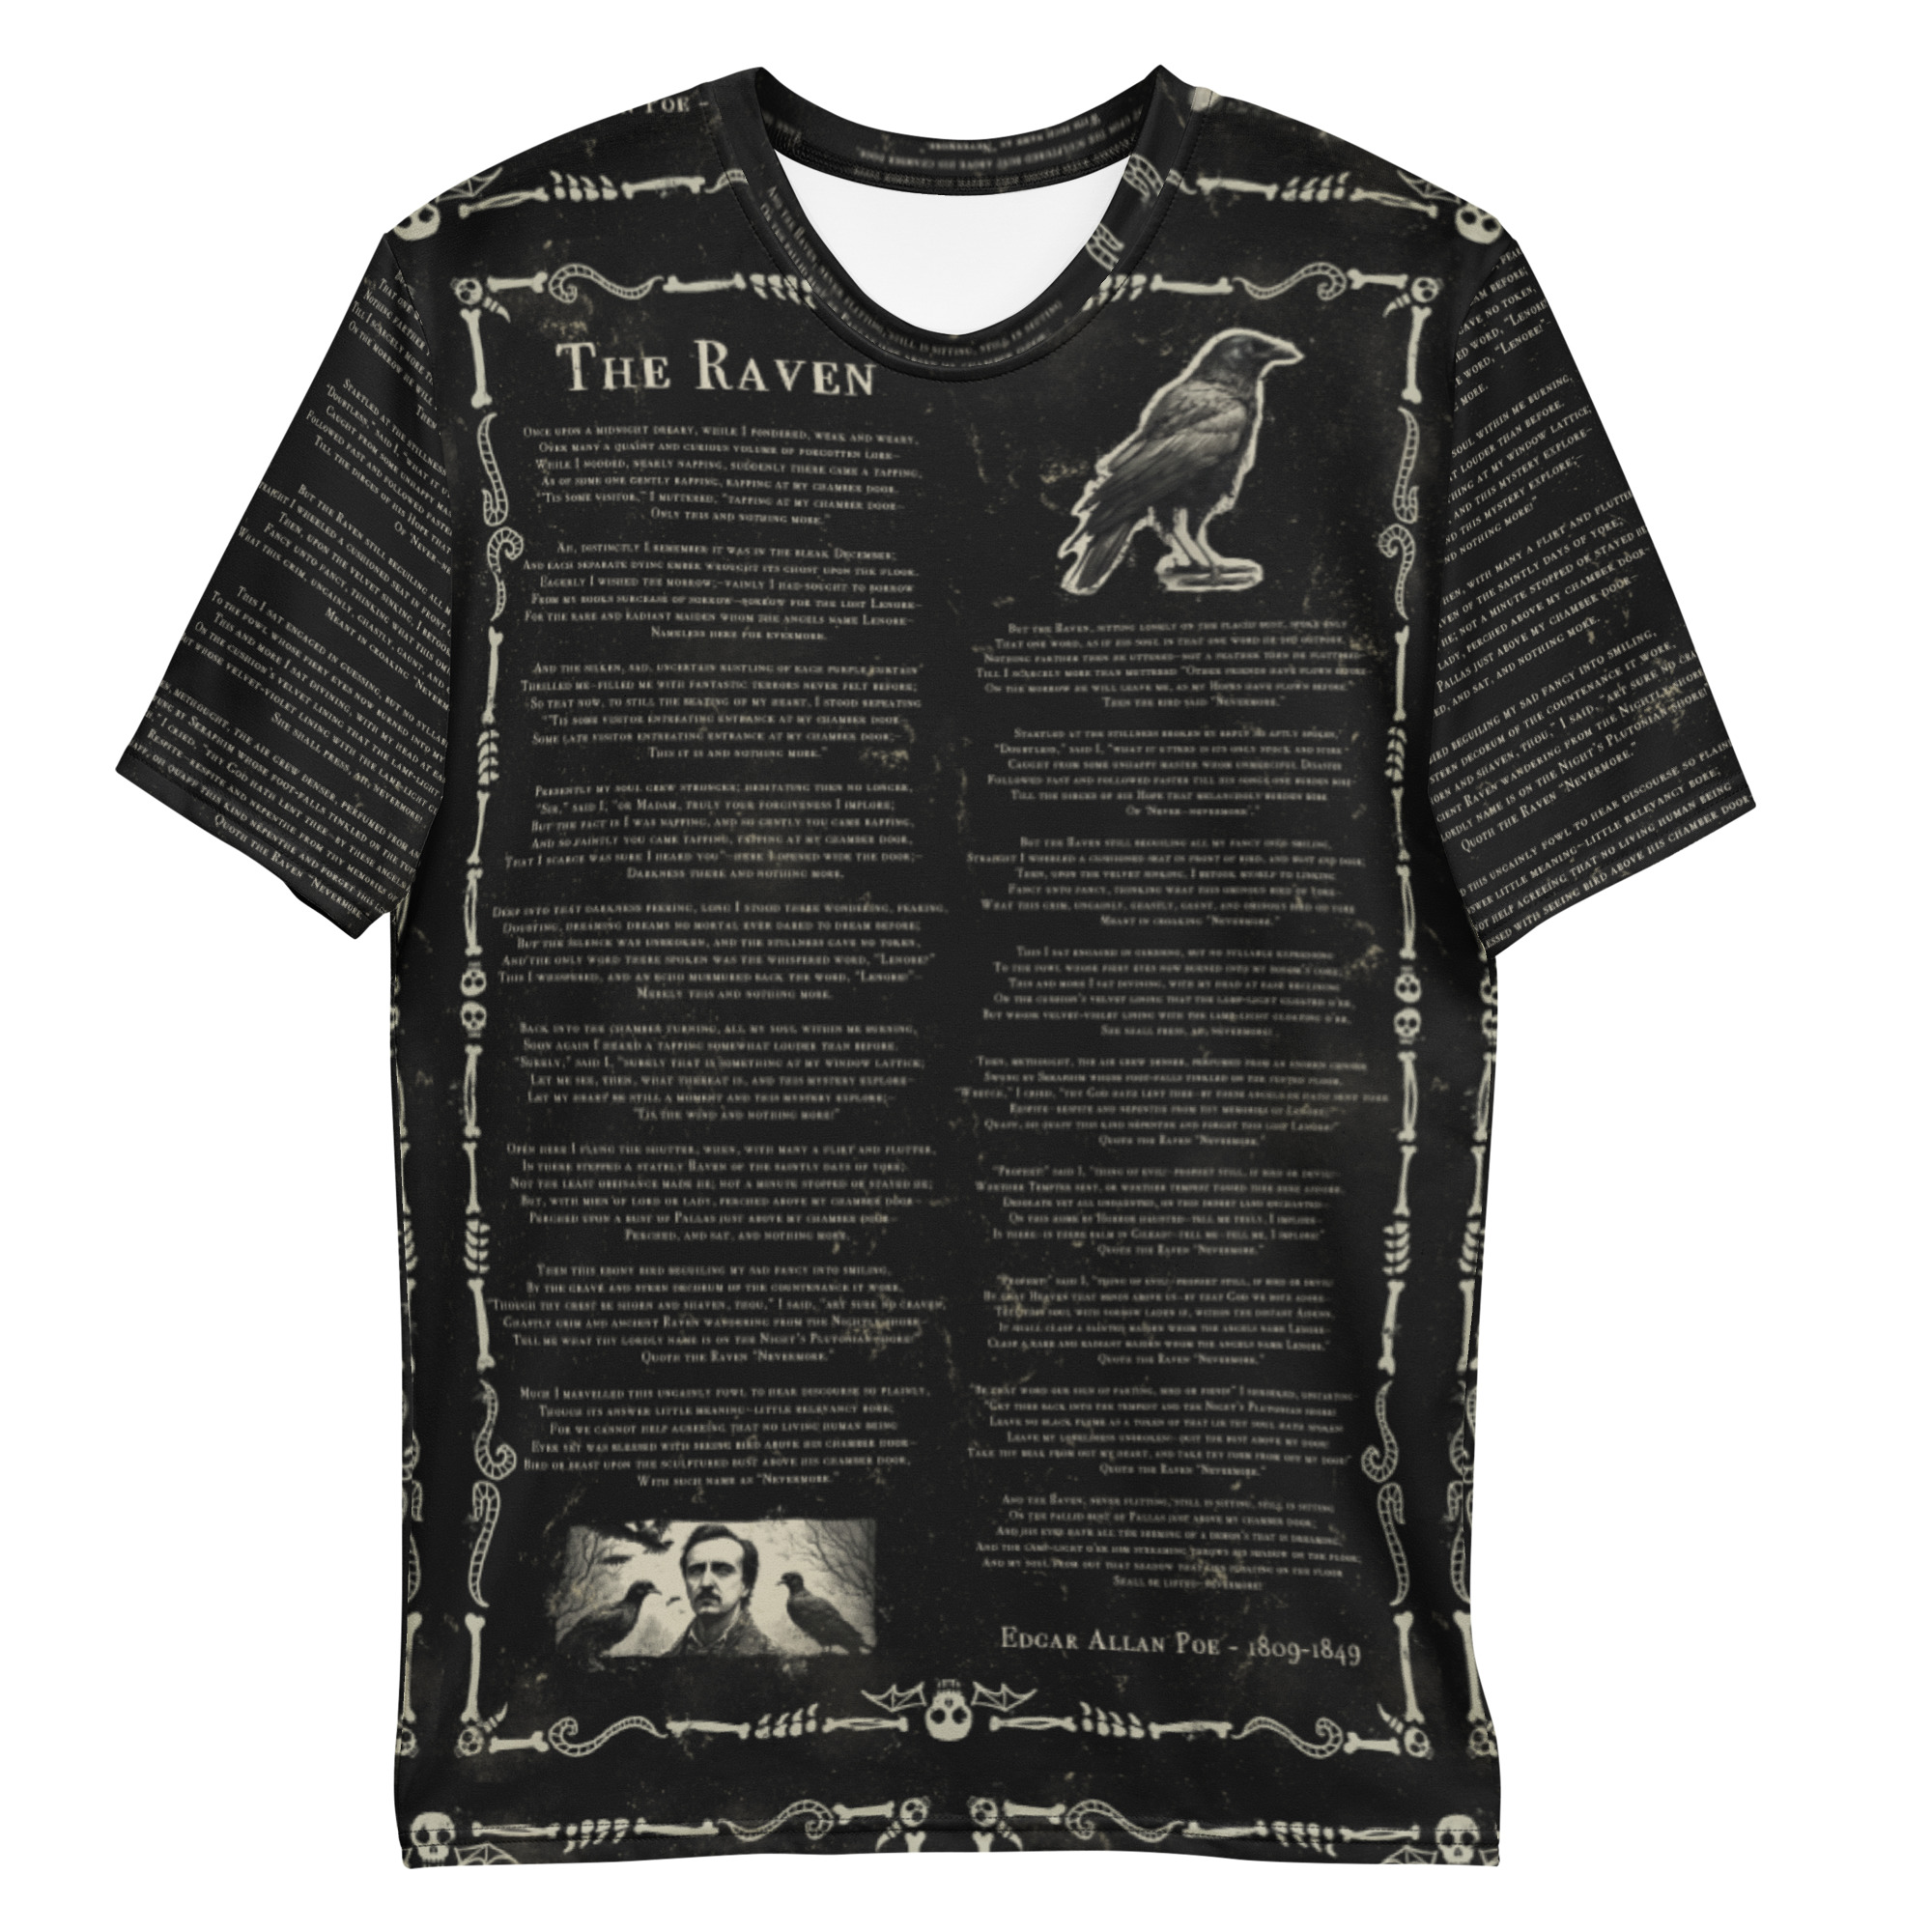 Featured image for “The Raven - Edgar Allan Poe -  Men's t-shirt”